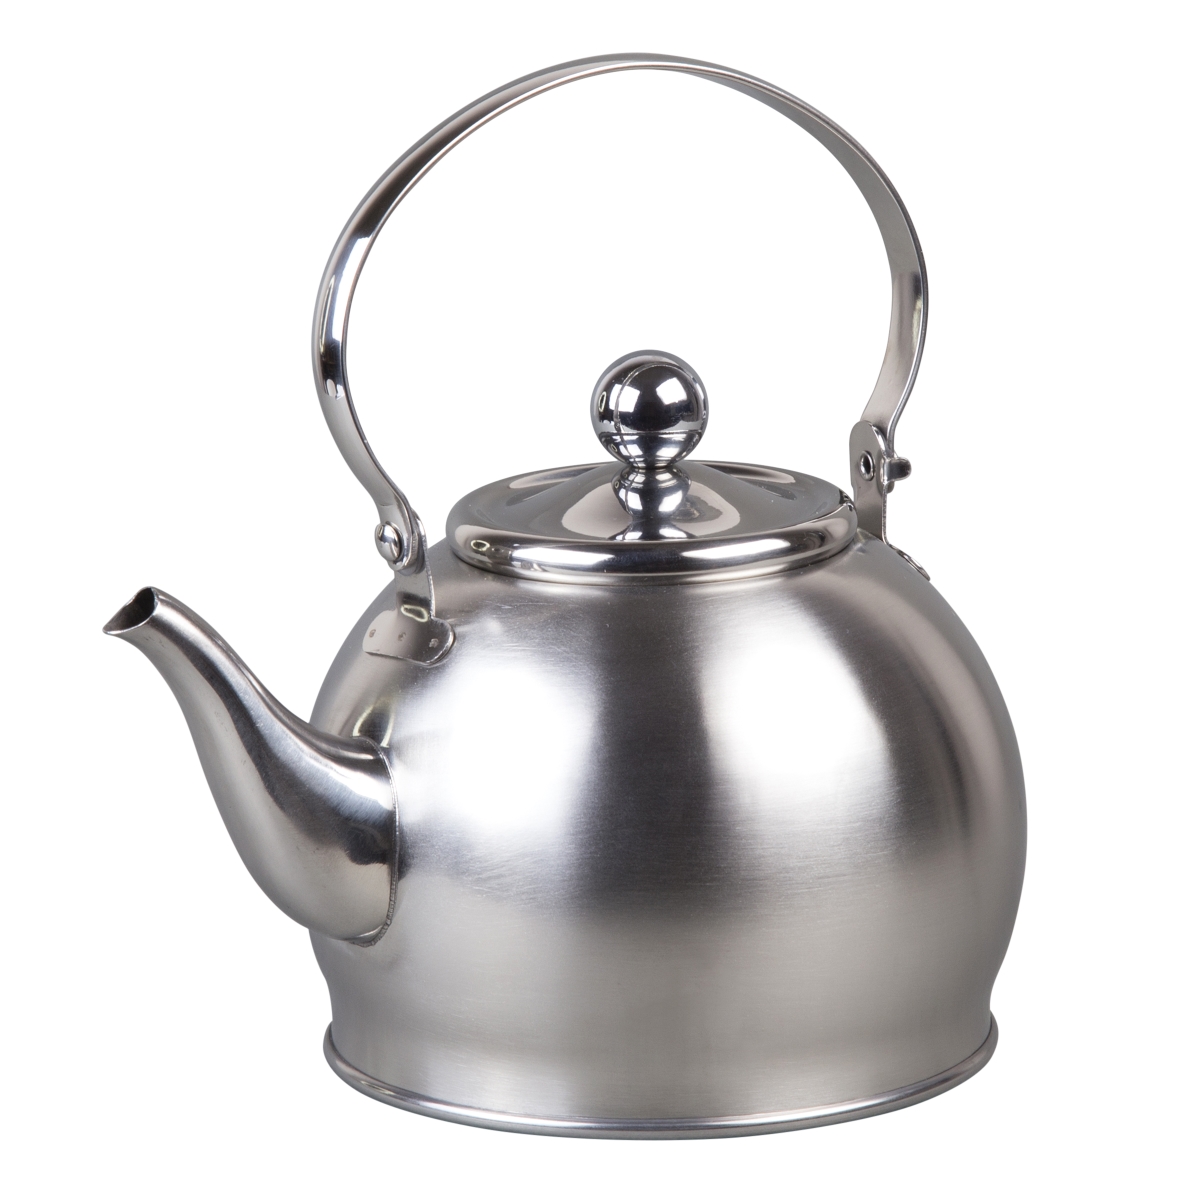 72258 1 Qt. Royal Stainless Steel Tea Kettle With Removable Infuser Basket & Folding Handle